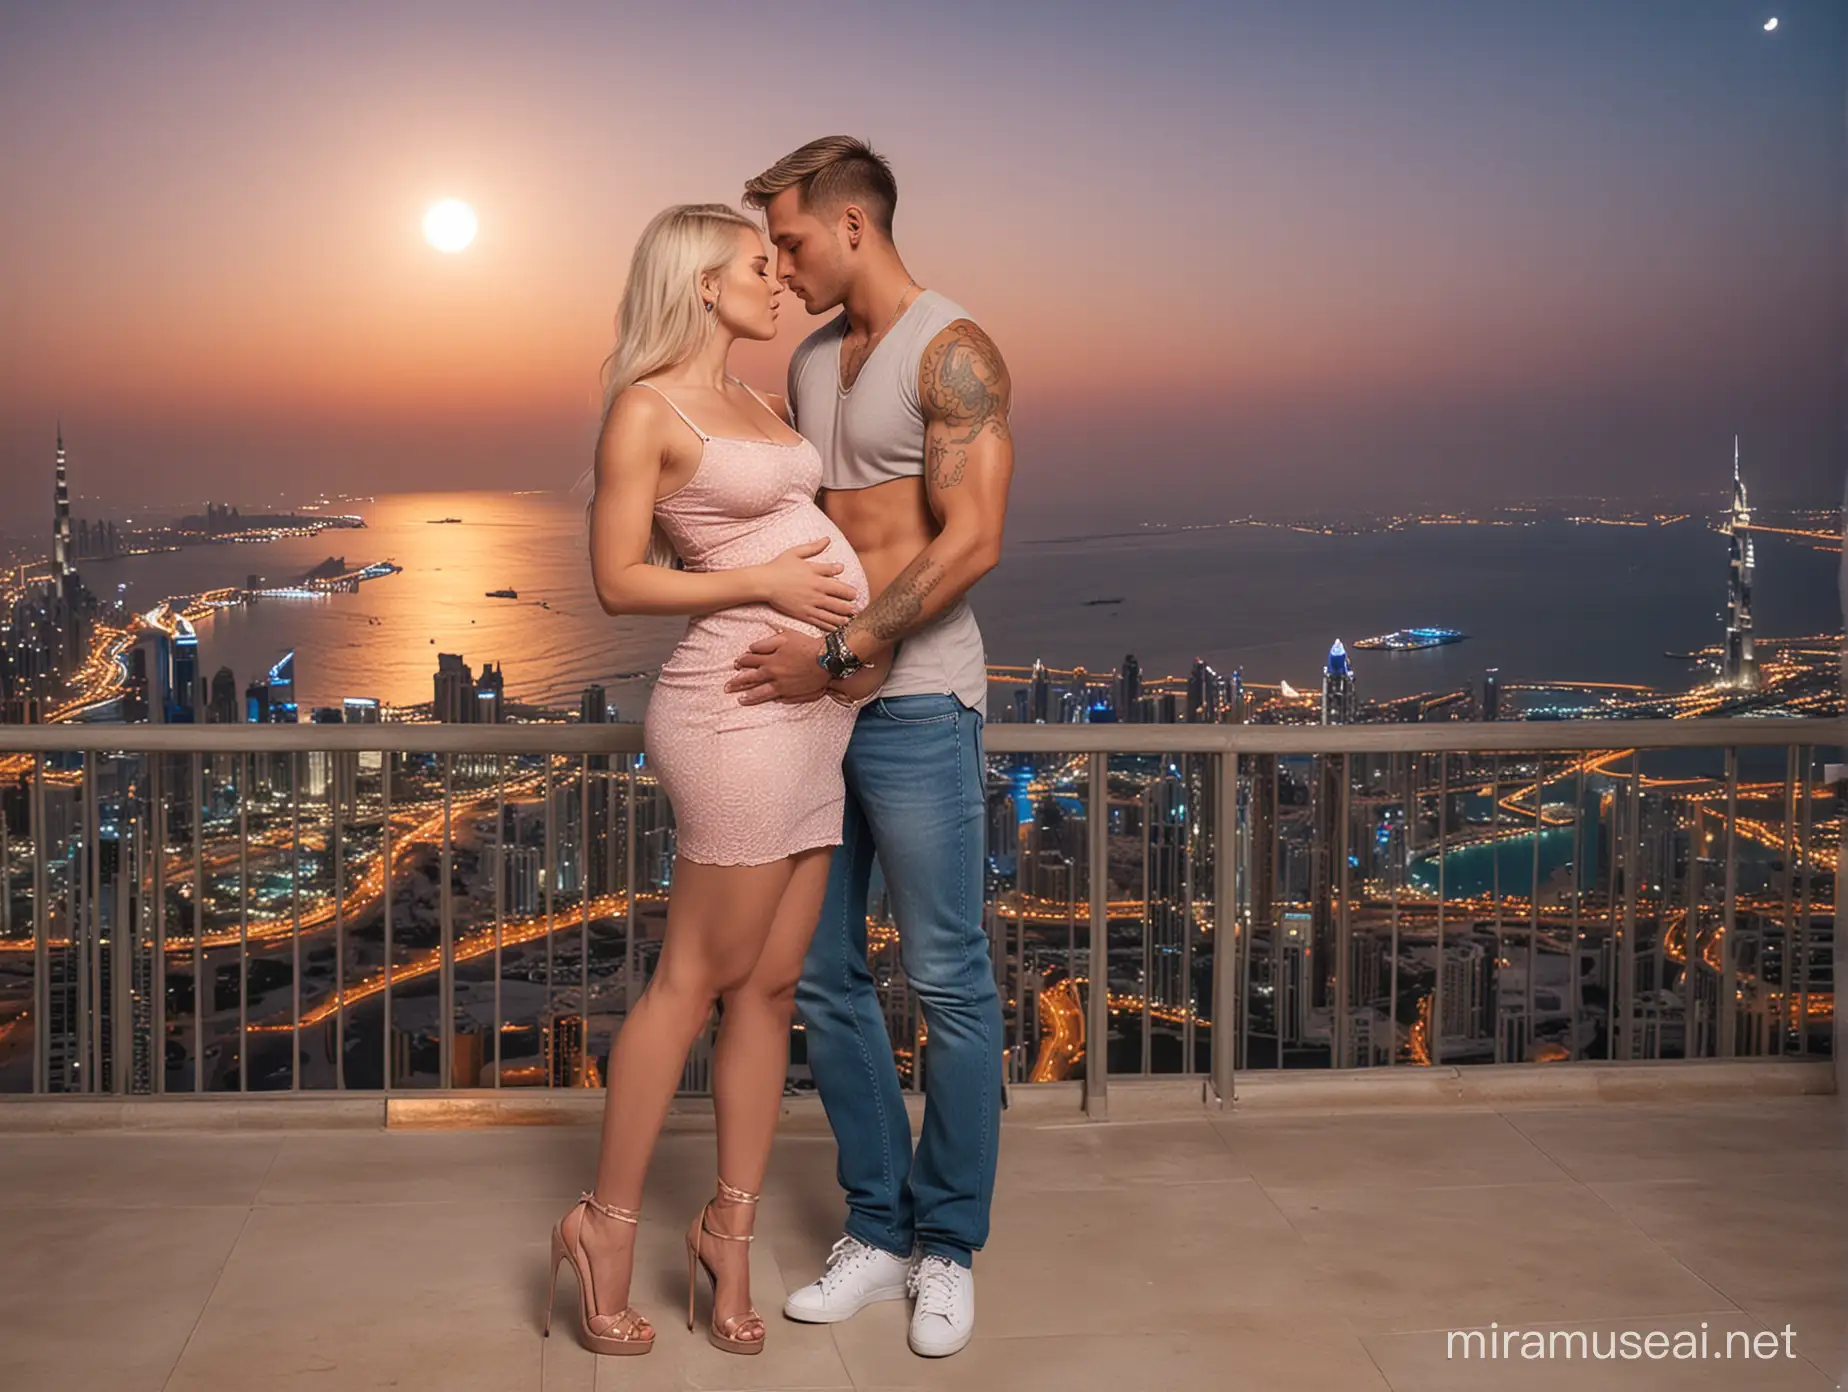 Pregnant Blonde Girl Kissing Muscular Husband with Moonlit Evening Background